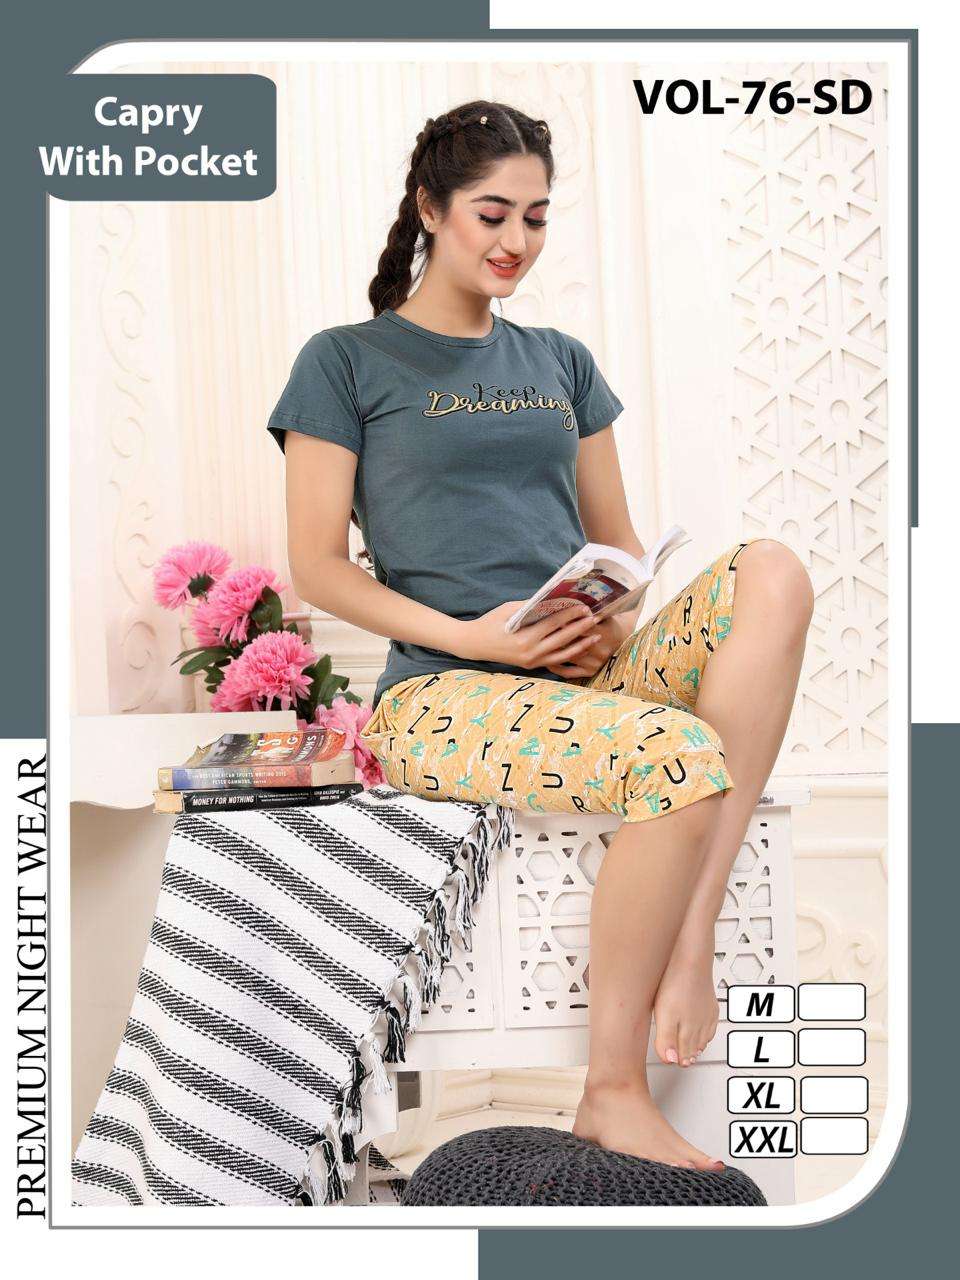 summer special shinker nighty gown vol 455 sd printed hosiery cotton nighty  collection